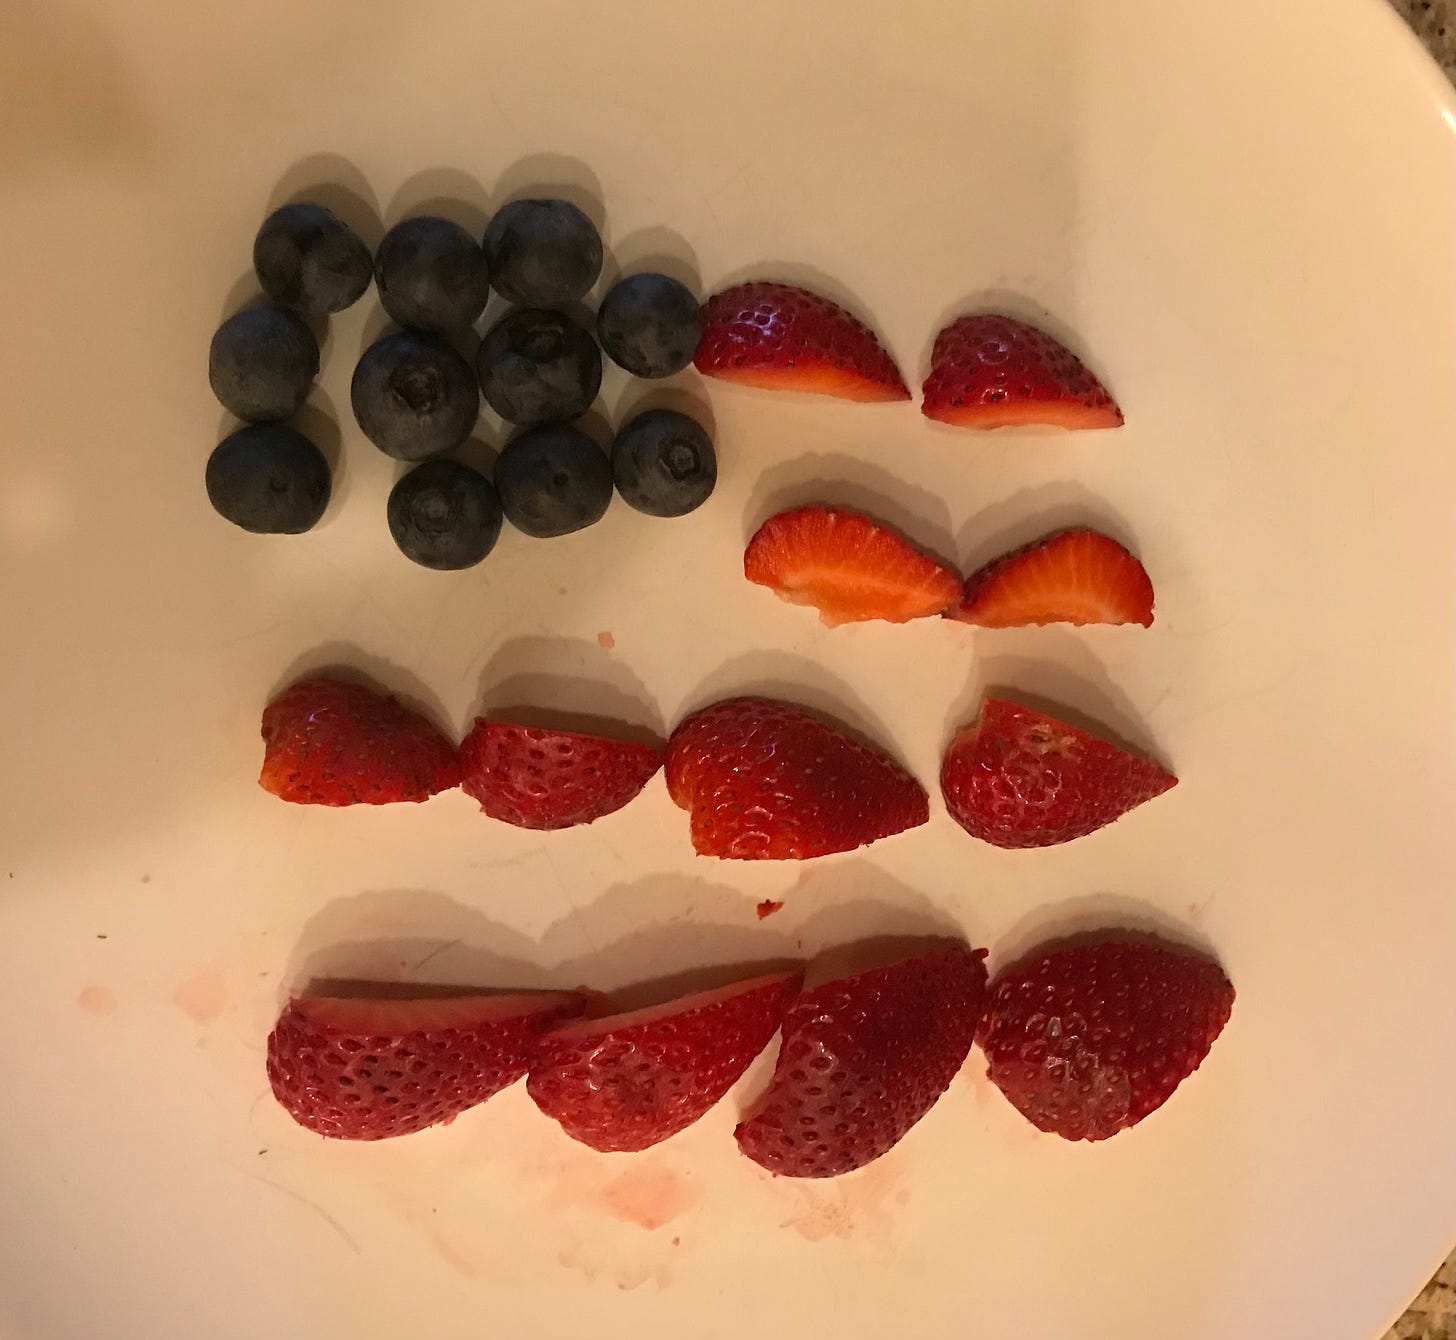 blurry image of a white plate with some blueberries and sliced strawberries, in a vague shape of an American flag